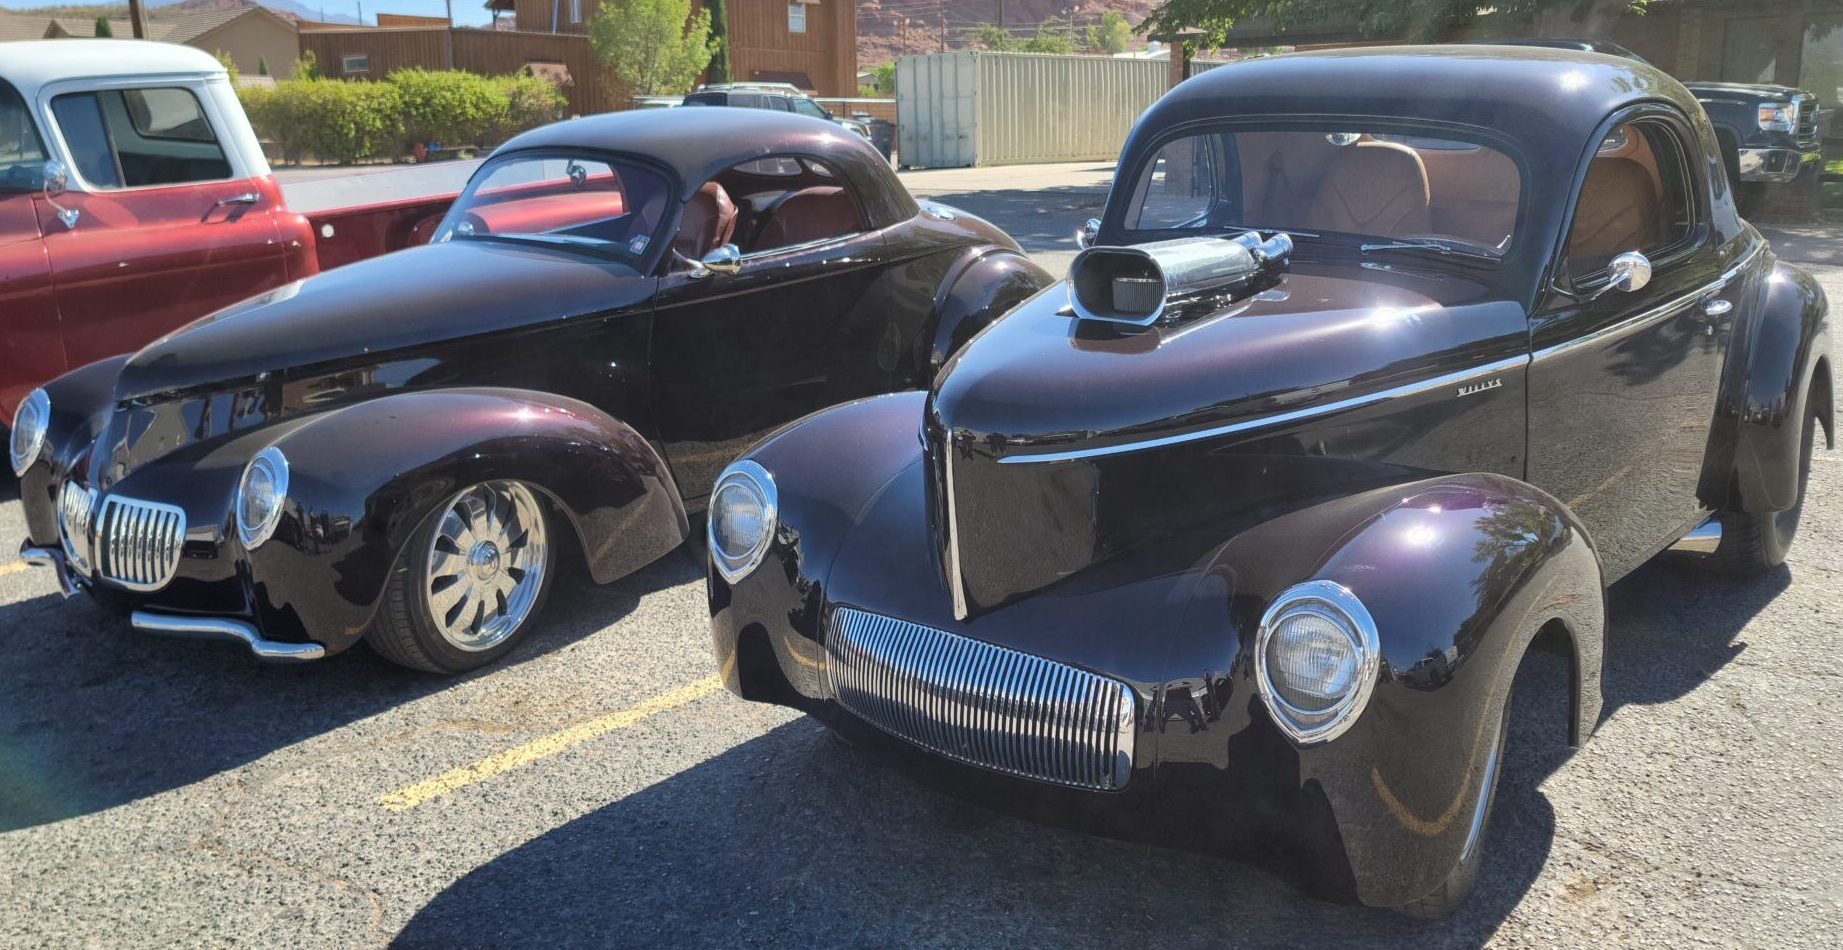 two black vintage cars parked